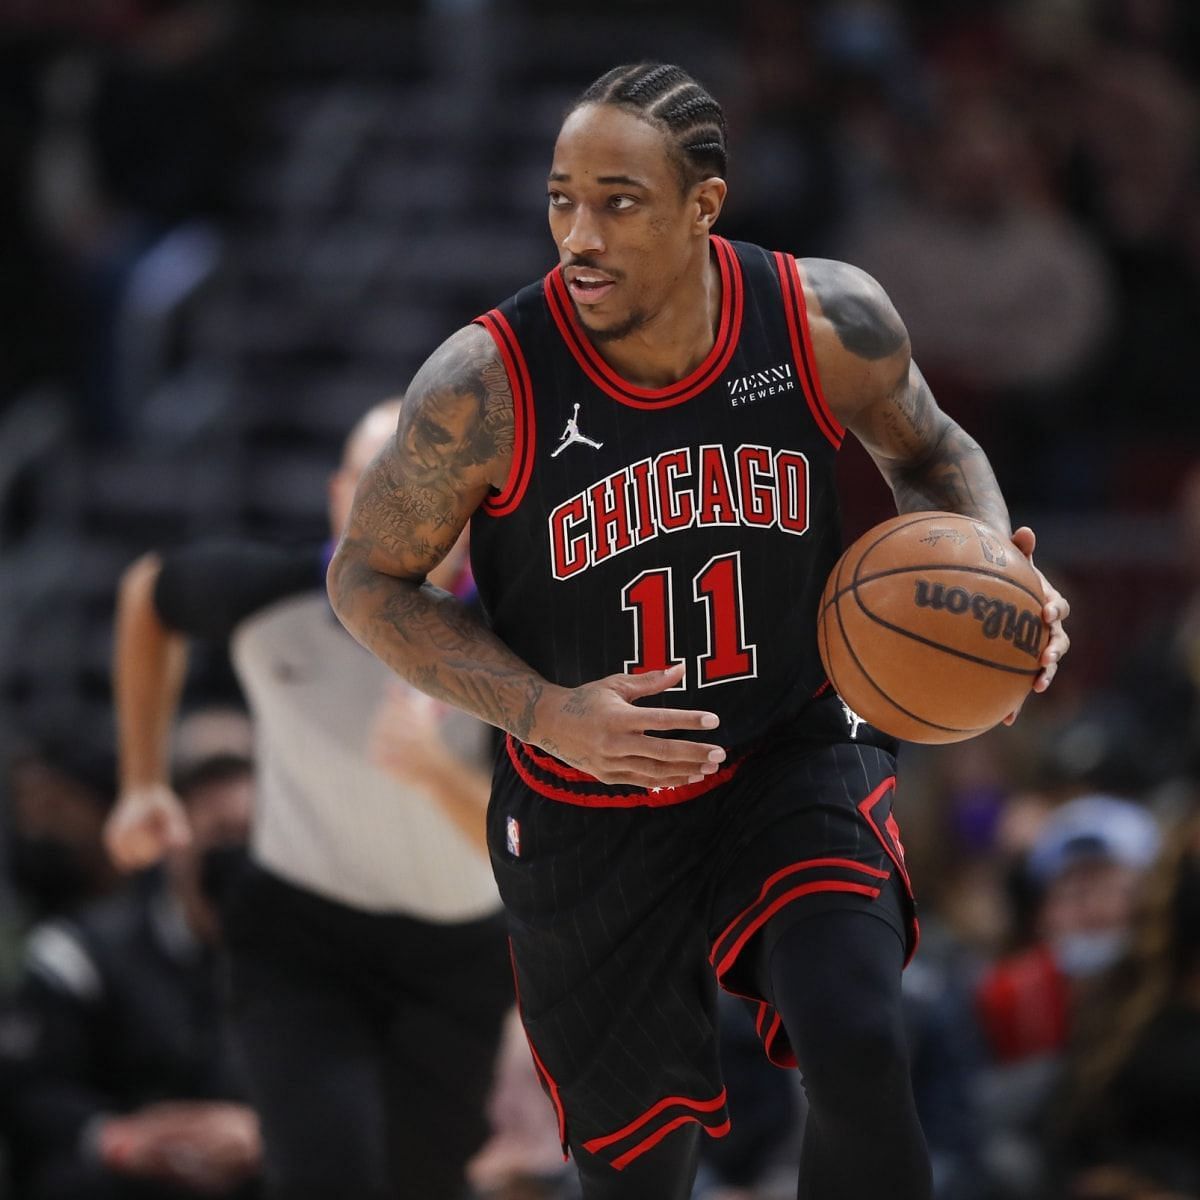 DeMar DeRozan leads the Chicago Bulls in a tilt against the Indiana Pacers